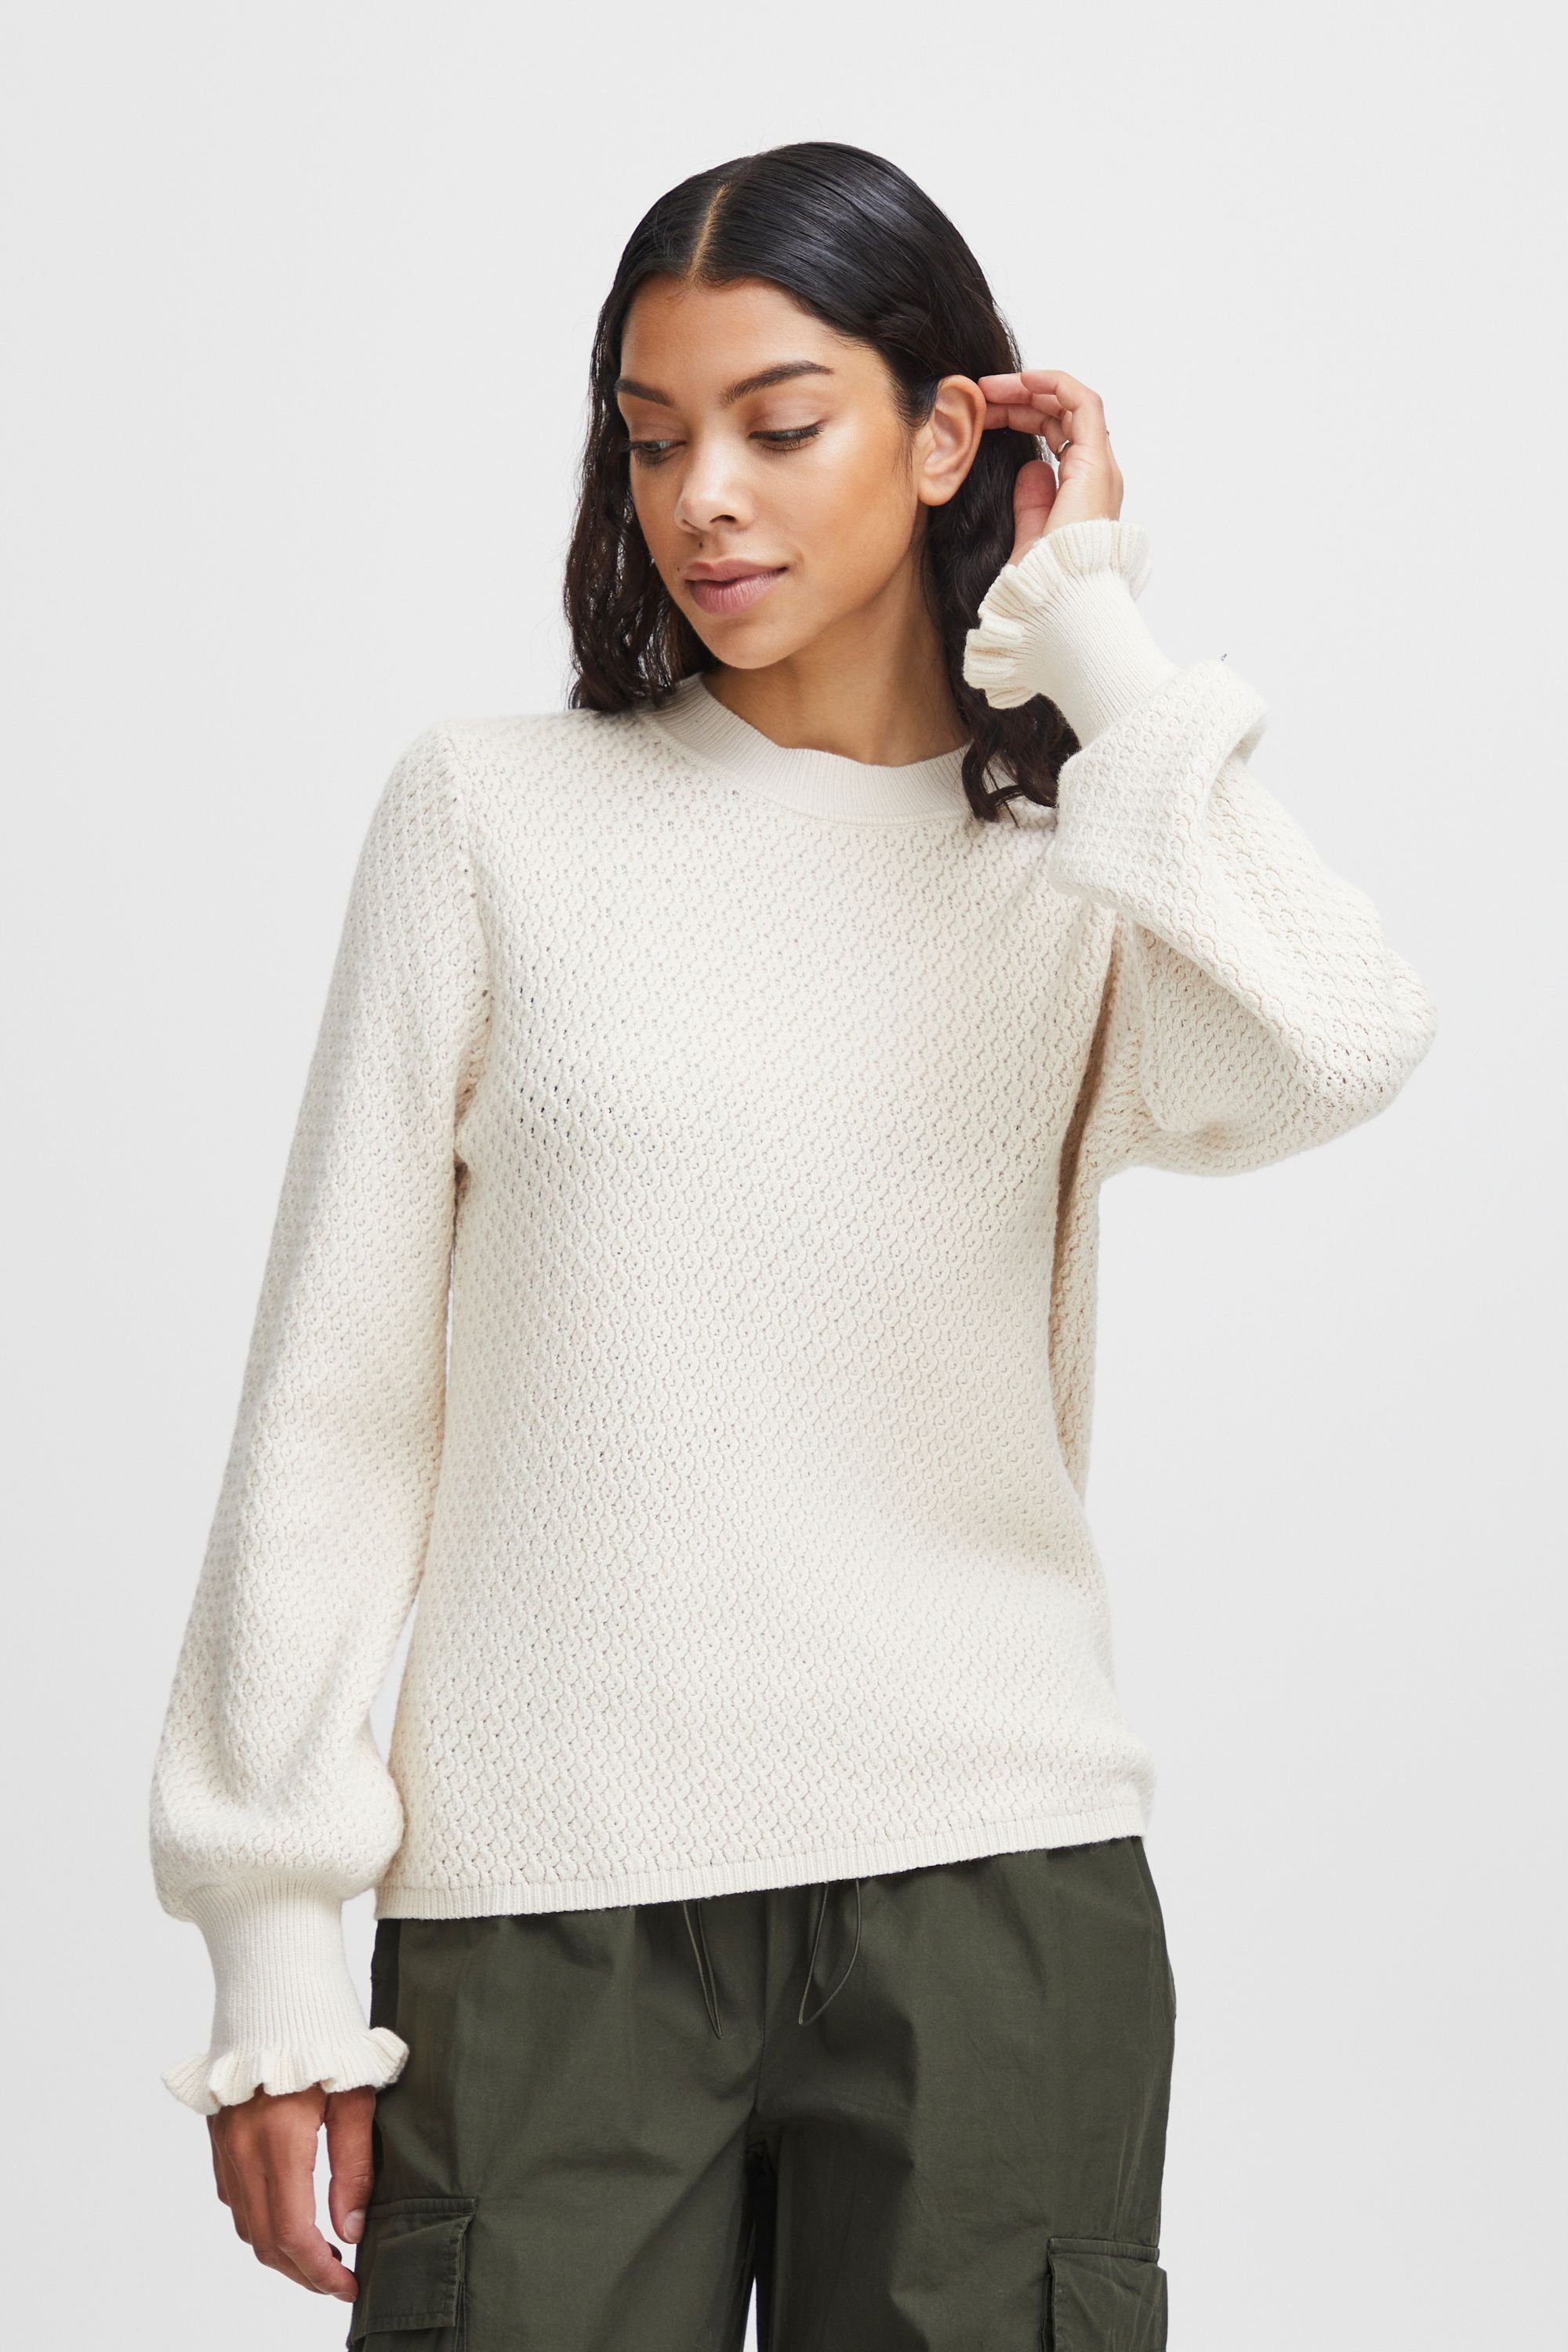 b.young Strickpullover BYMILO STRUCTURE JUMPER 4 - 20813883